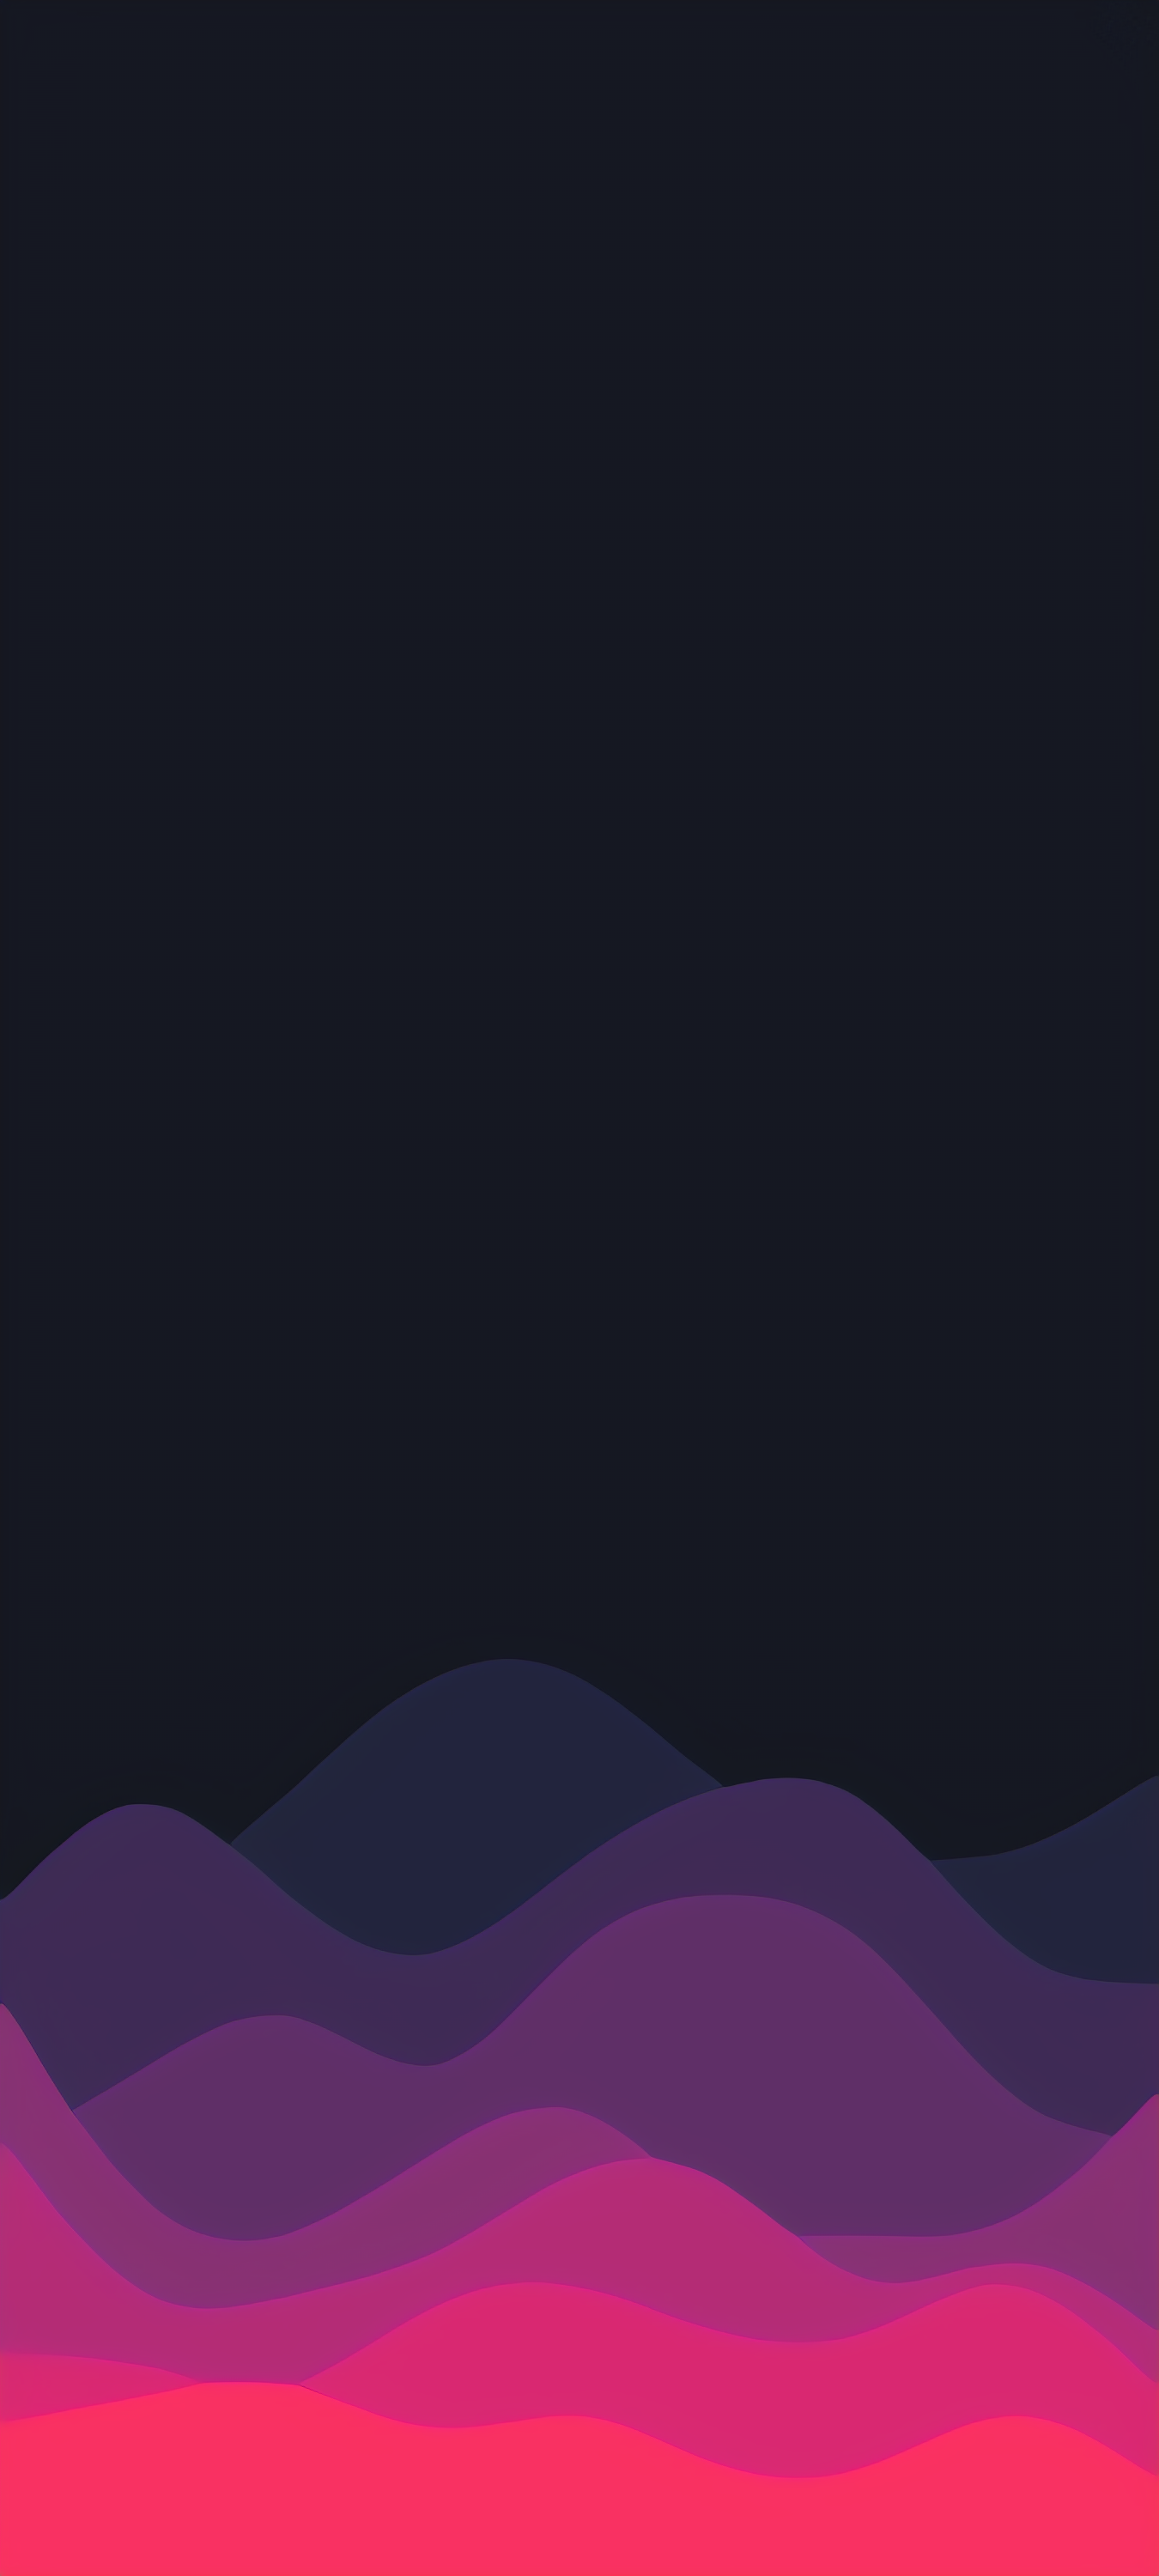 Abstract waves wallpapers for iPhone